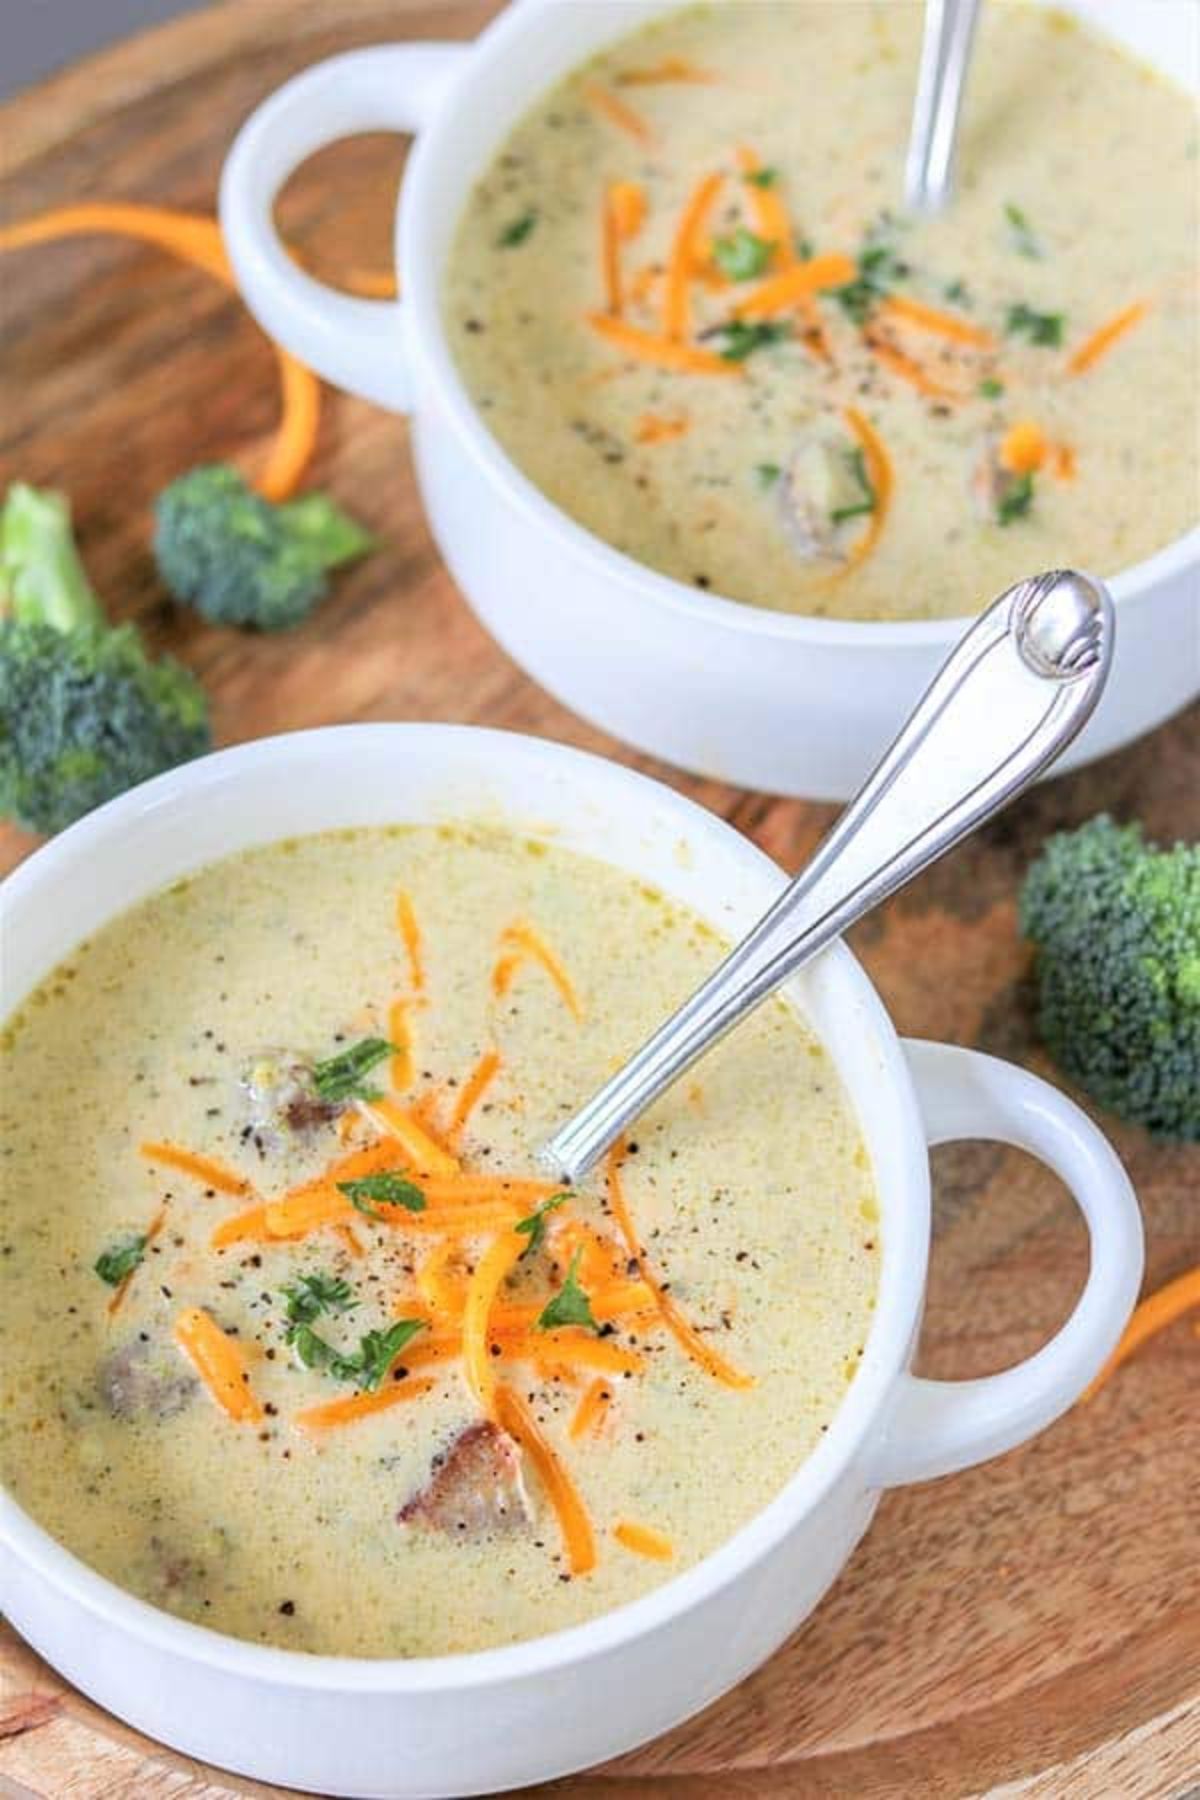 On a wooden board are two round soup bowls with handles. They are filled with a creamy soup, topped with grated orange cheese. Scattered around are small broccoli florets